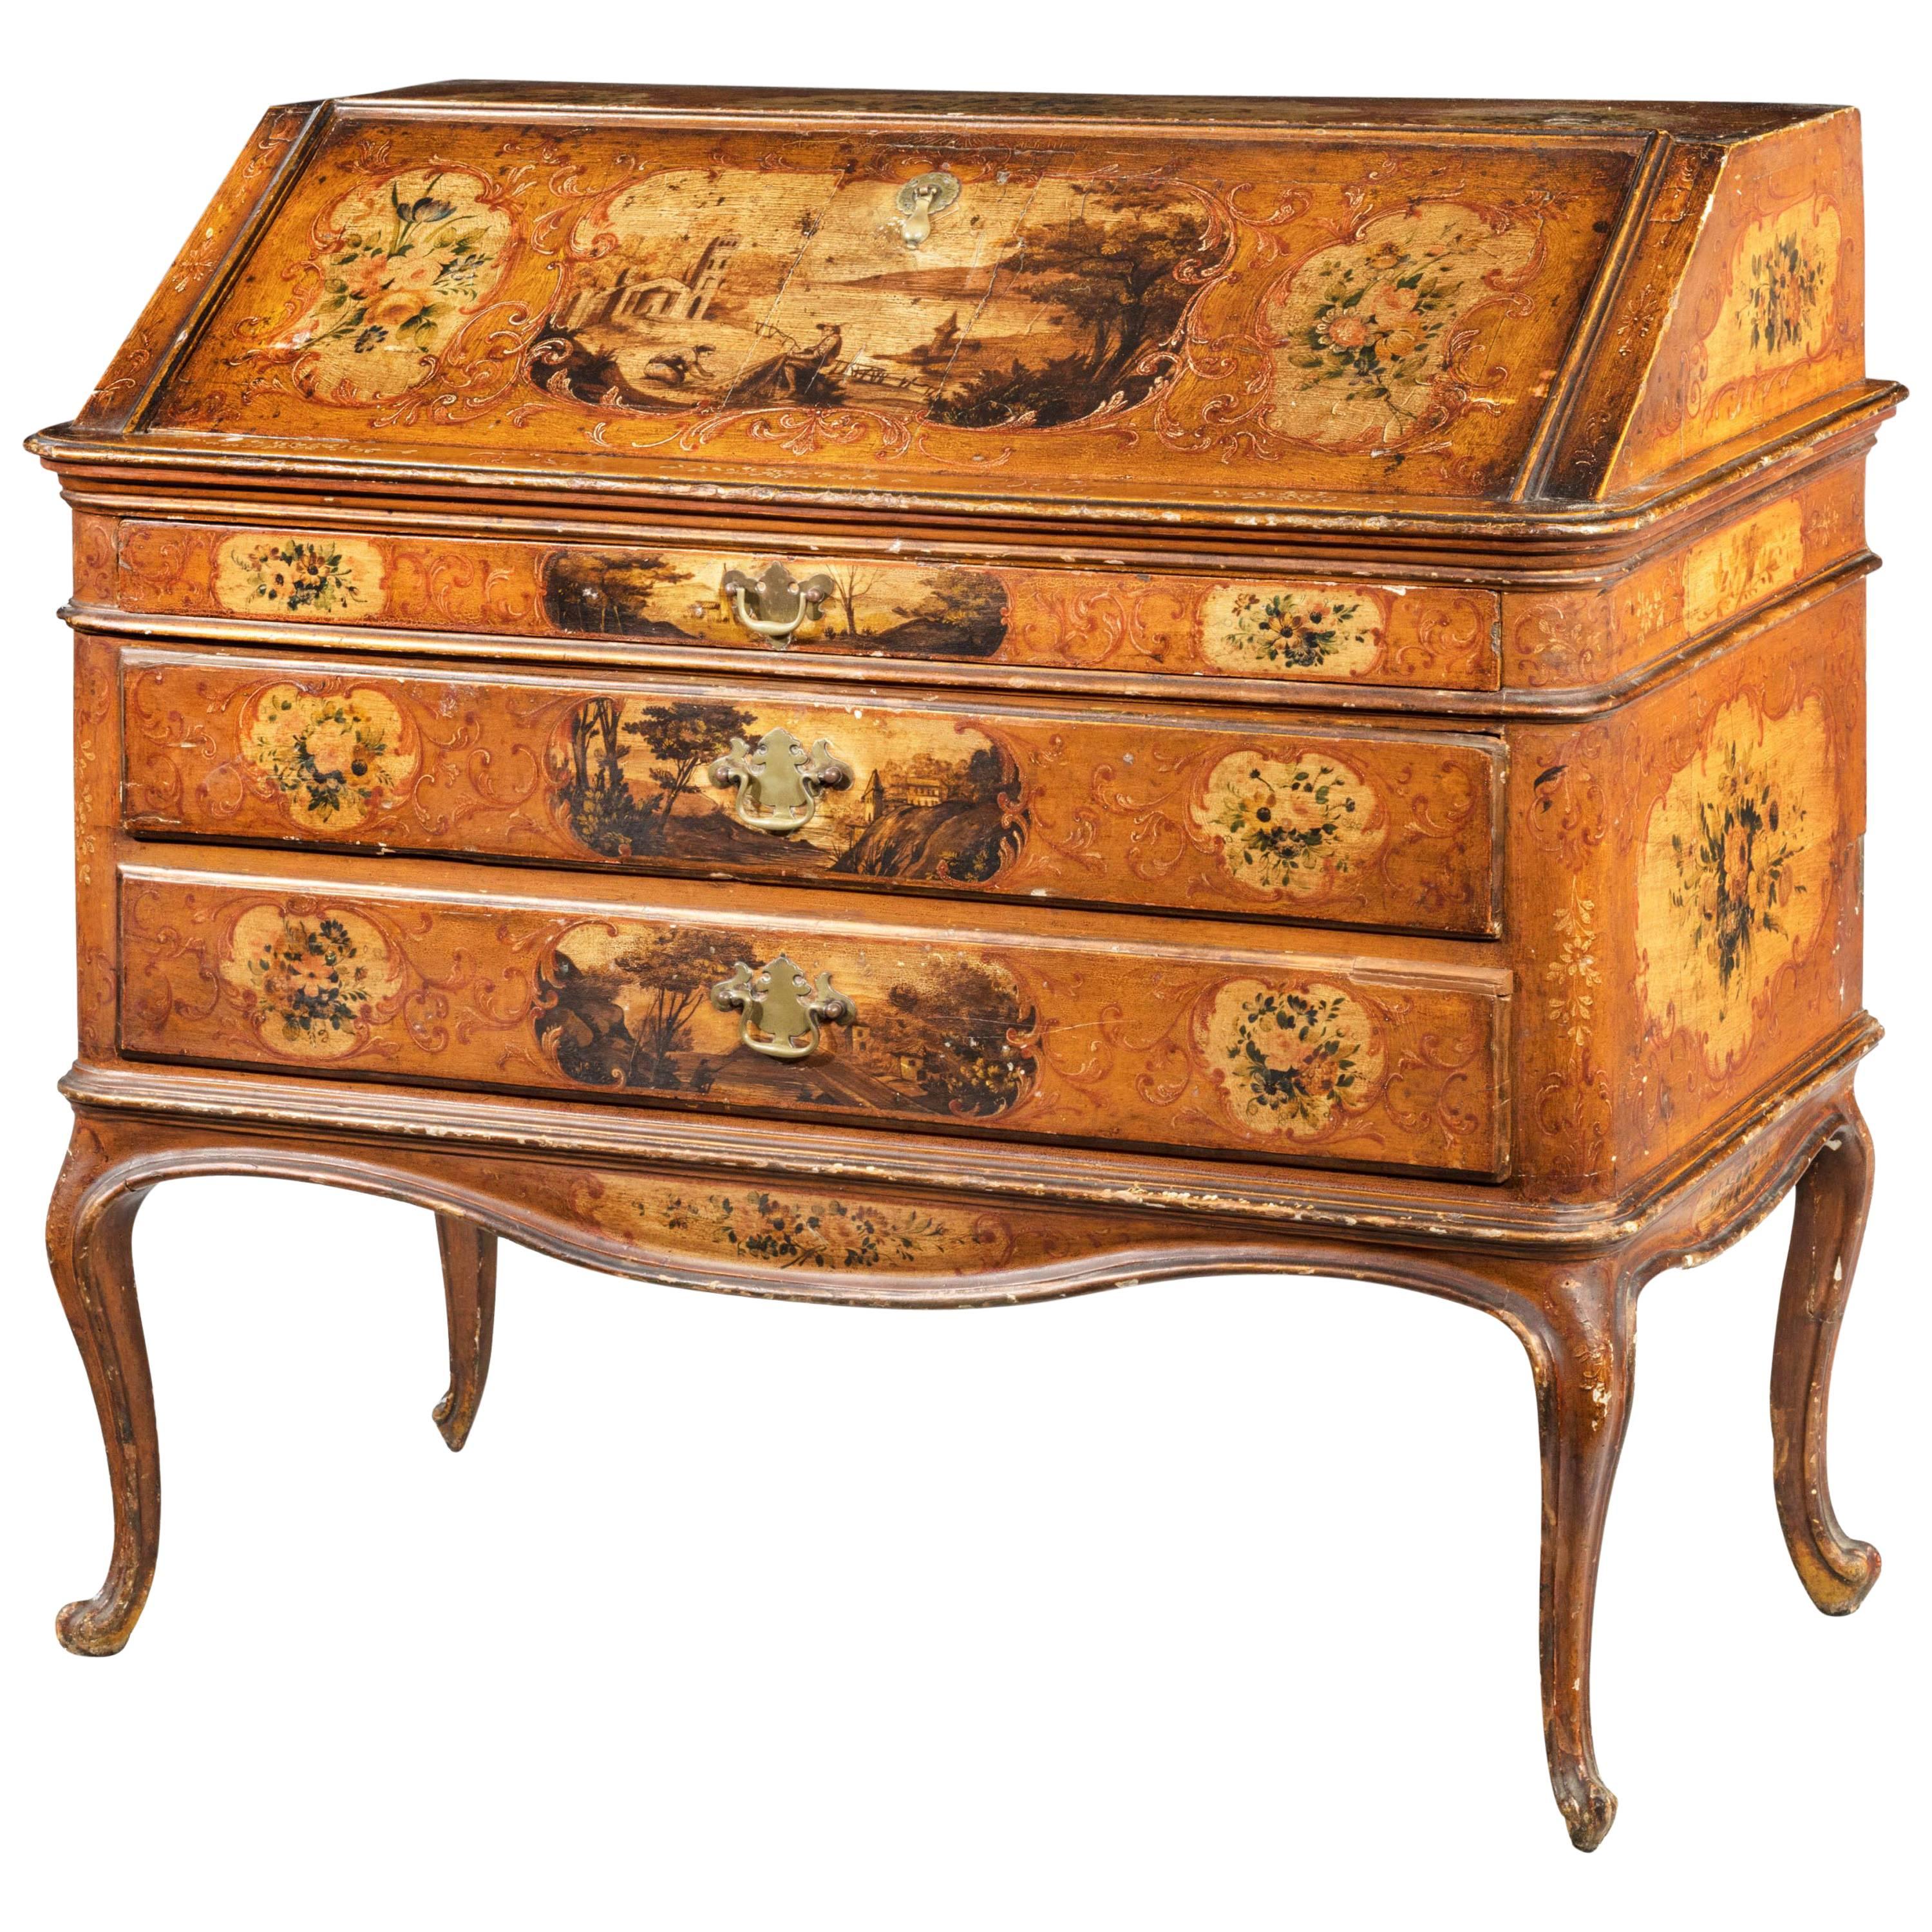 Mid-18th Century Venetian Lacquered and Gilded Bureau